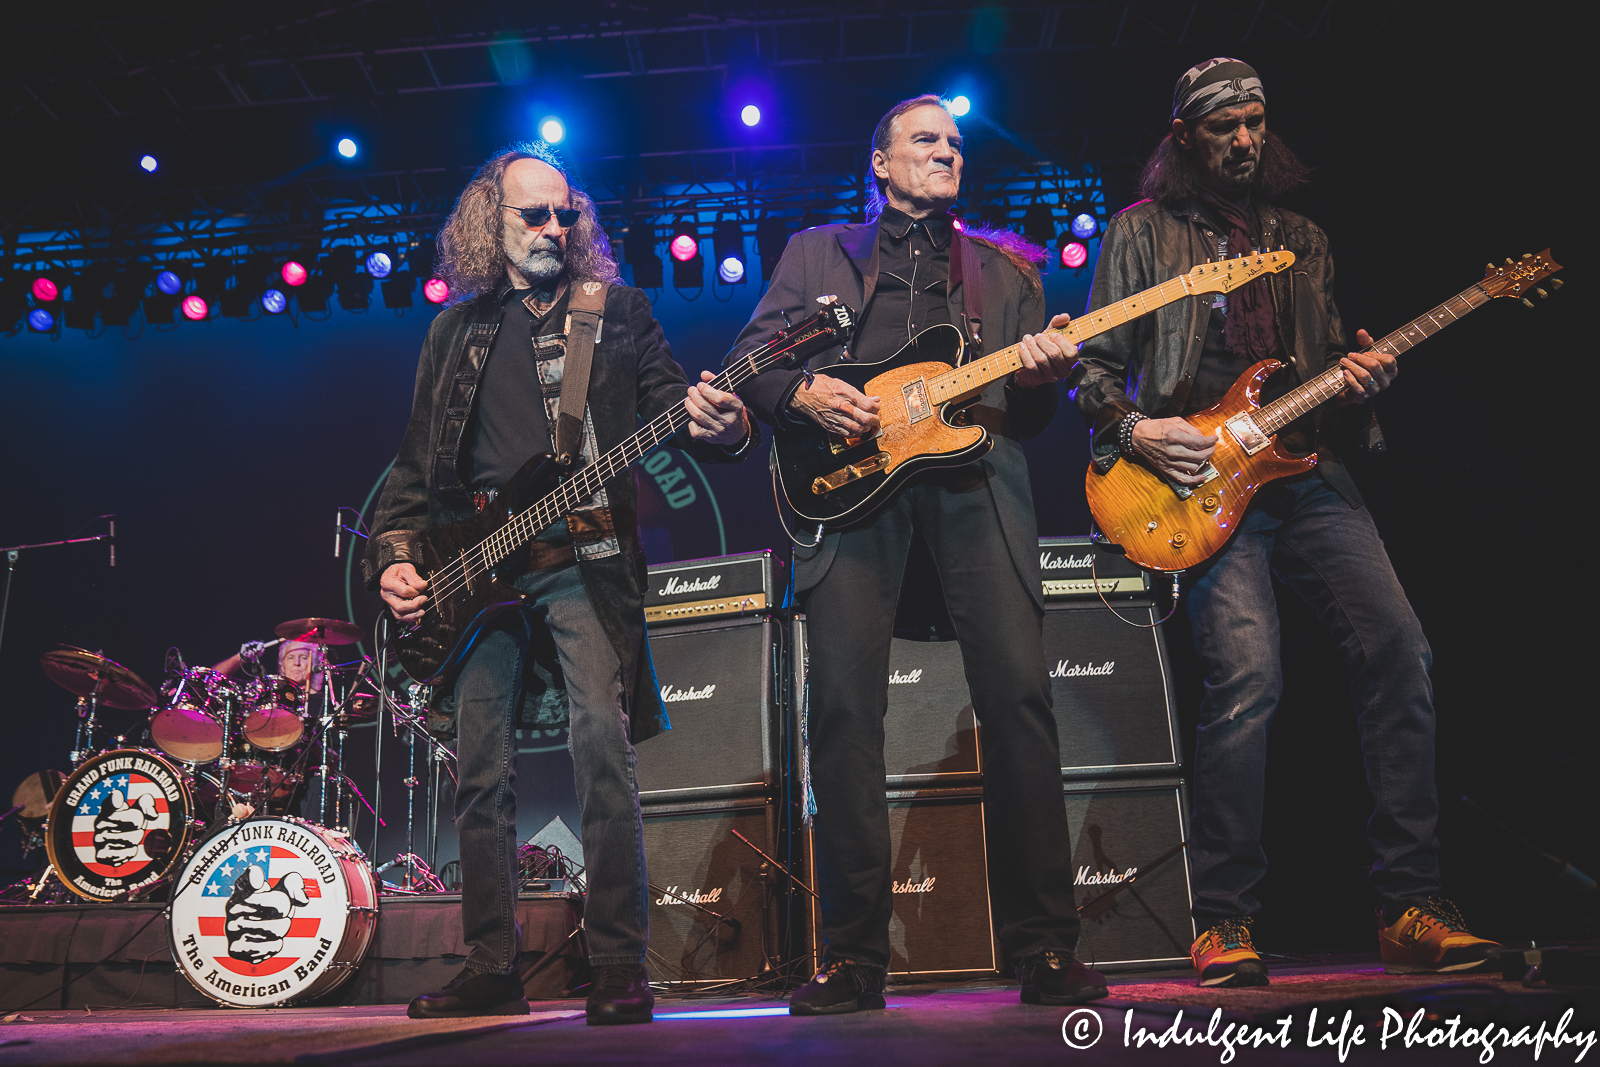 Grand Funk Railroad performing live in concert at Ameristar Casino's Star Pavilion in North Kansas City, MO on September 18, 2021.